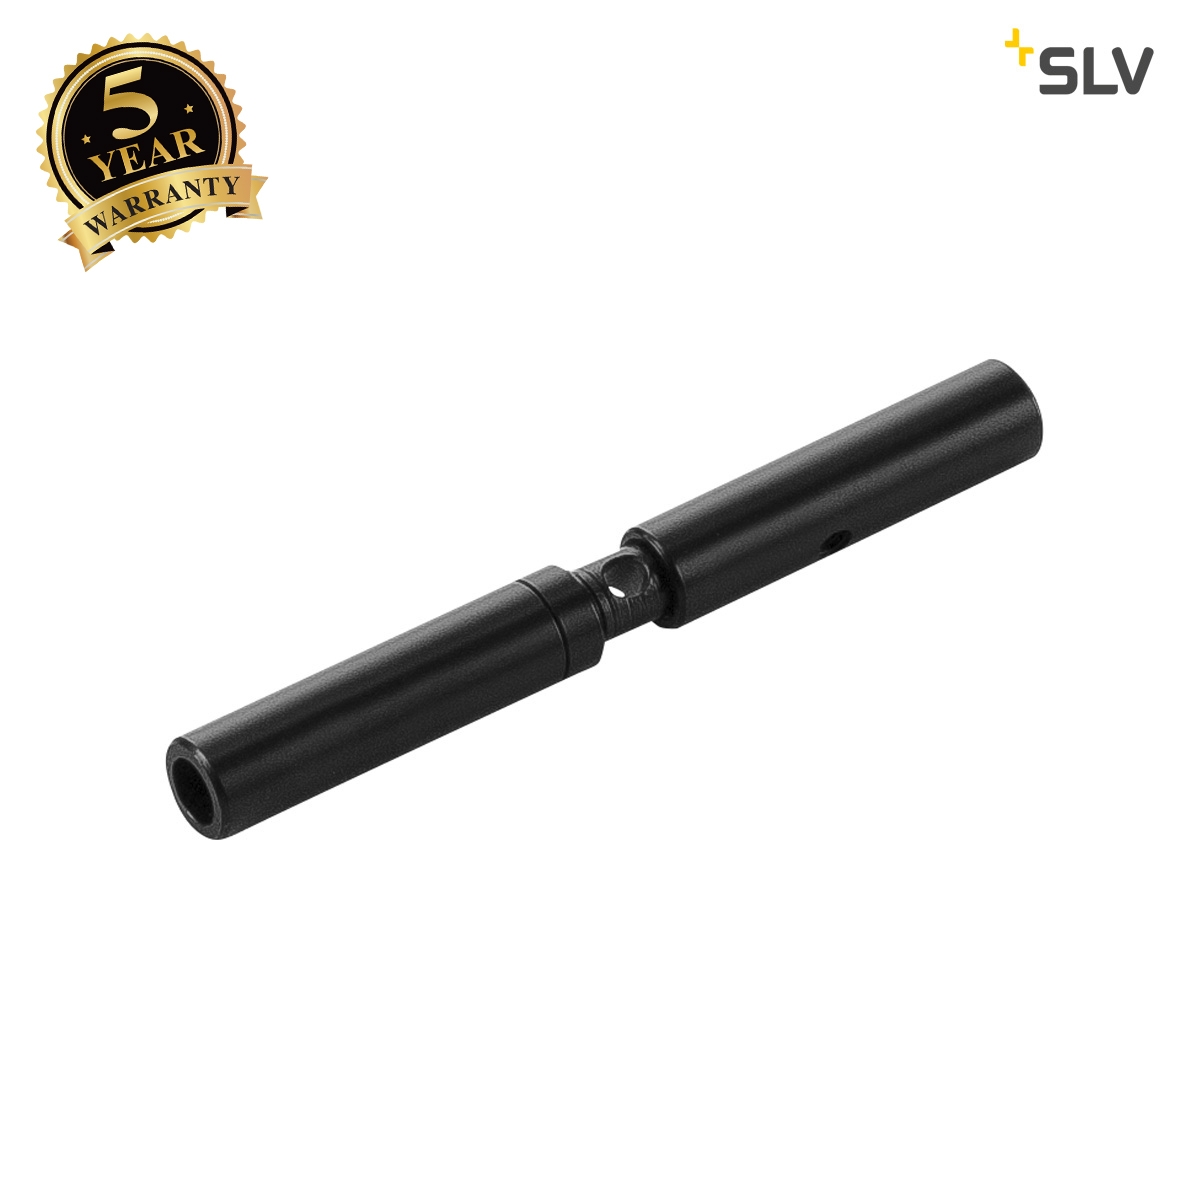 SLV CABLE TENSIONER, for TENSEO low-voltage cable system, black, 2 Stück 181530